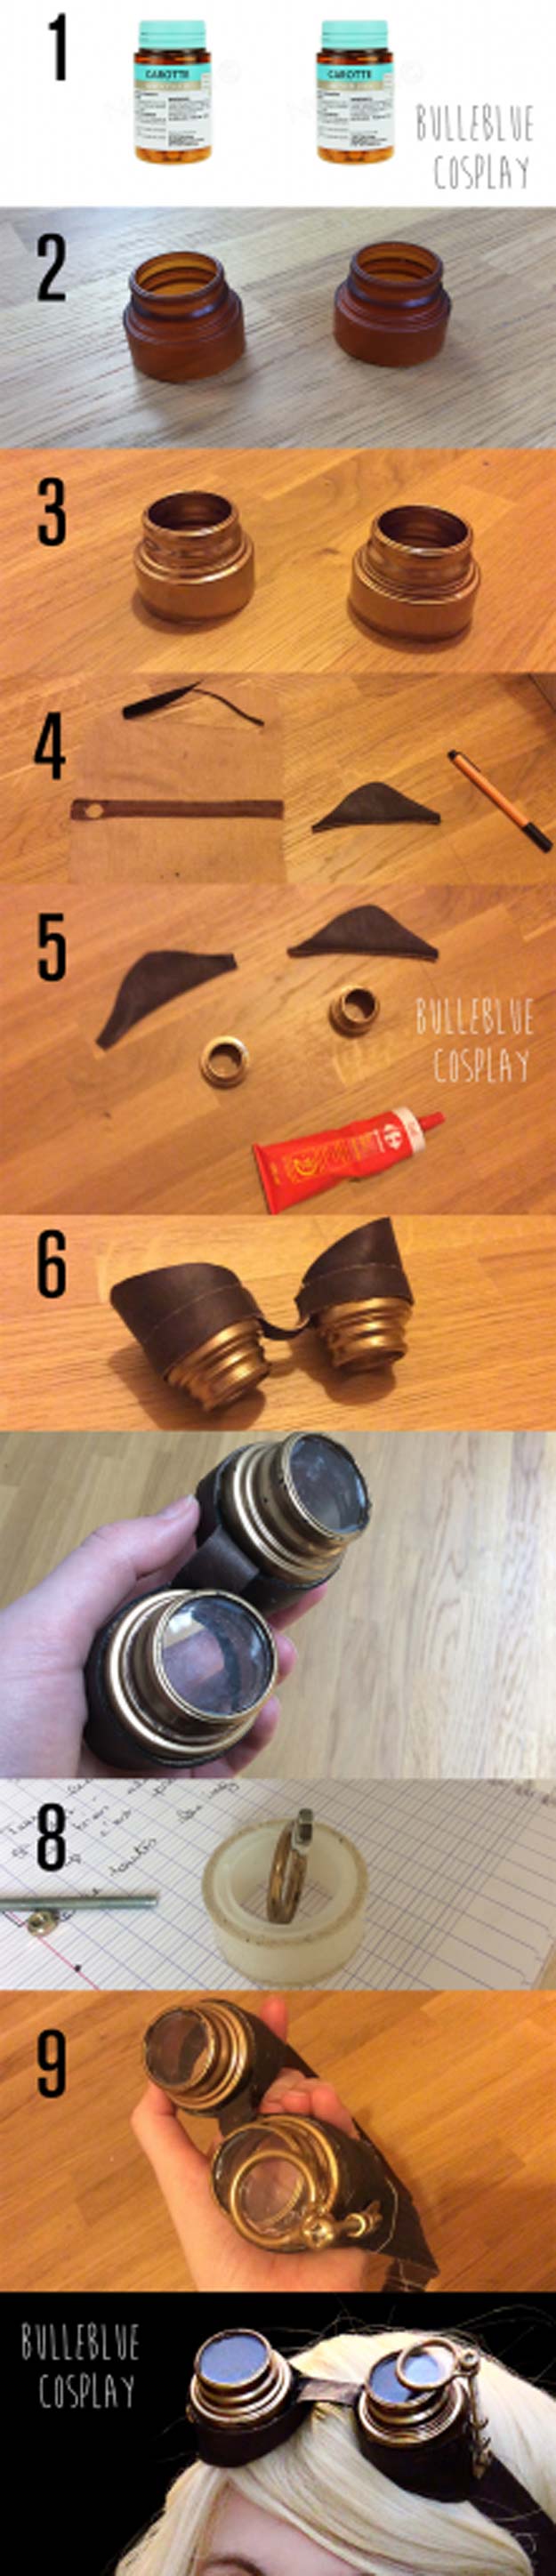 Cool Steampunk DIY Ideas - DIY Steampunk Goggles - Easy Home Decor, Costume Ideas, Jewelry, Crafts, Furniture and Steampunk Fashion Tutorials - Clothes, Accessories and Best Step by Step Tutorials - Creative DIY Projects for Adults, Teens and Tweens